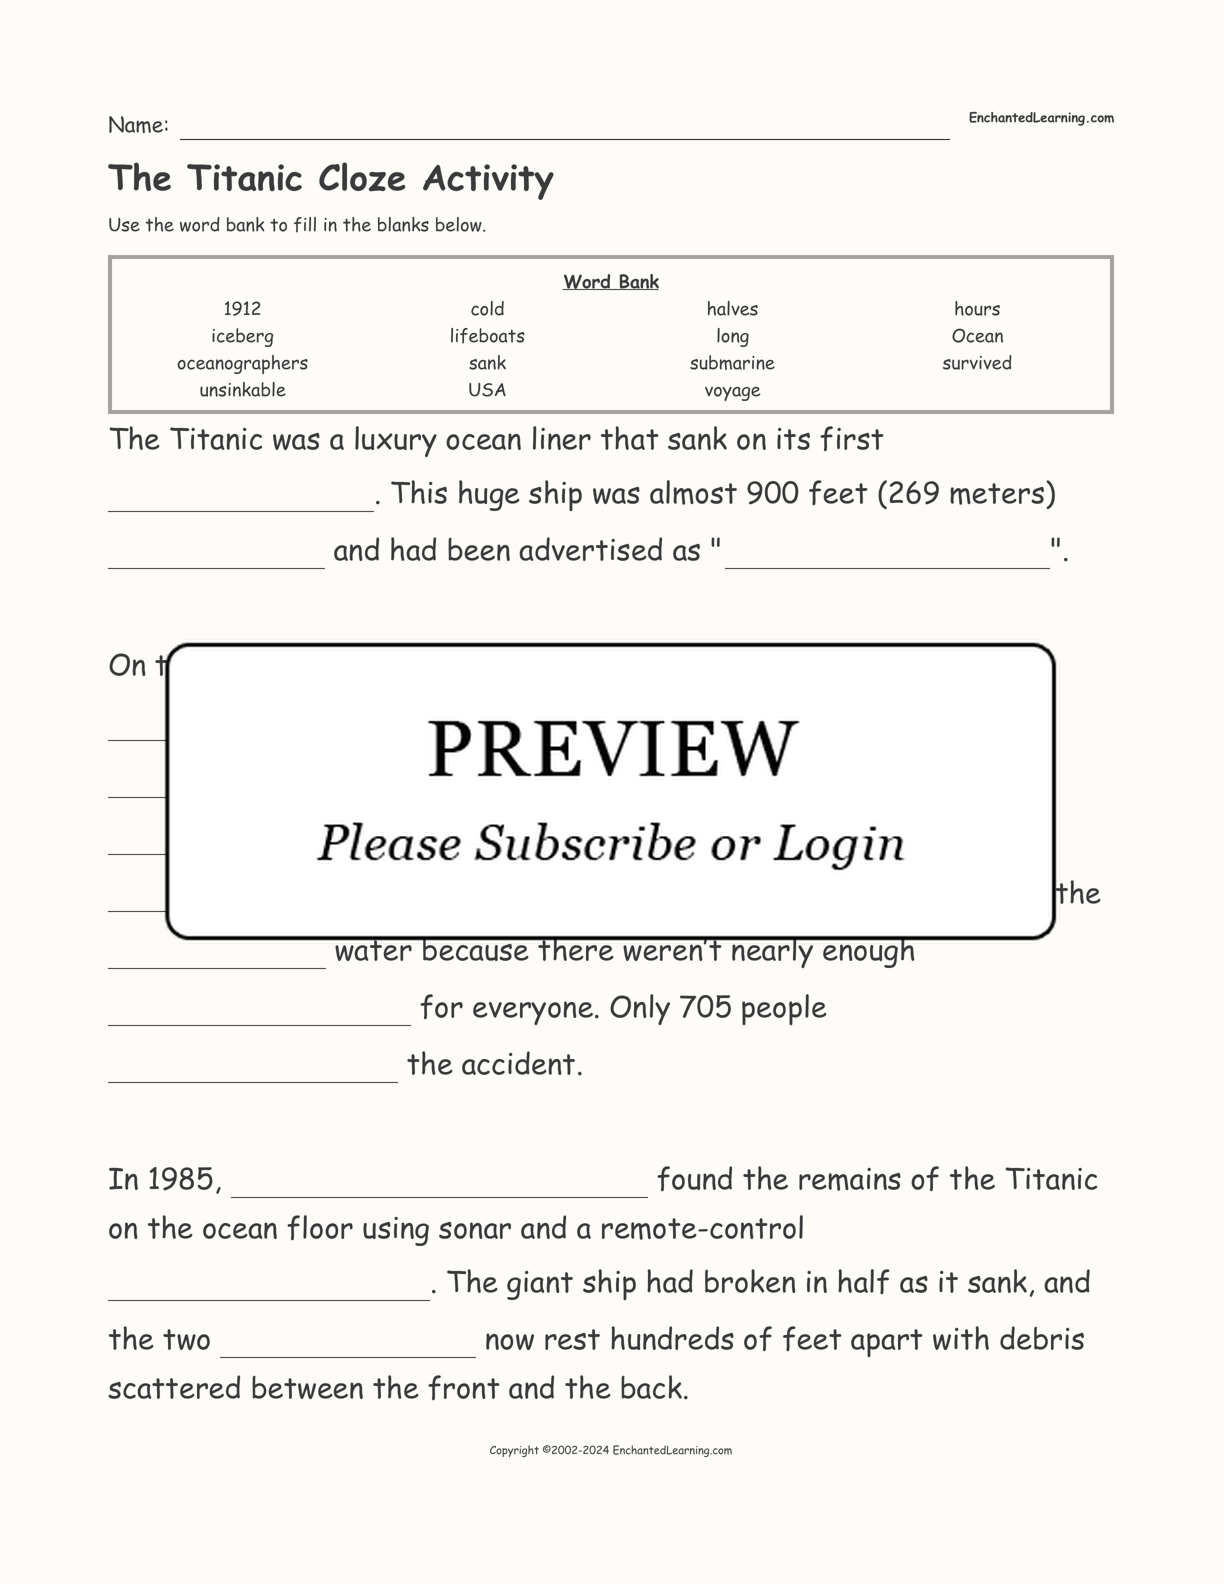 The Titanic Cloze Activity interactive worksheet page 1